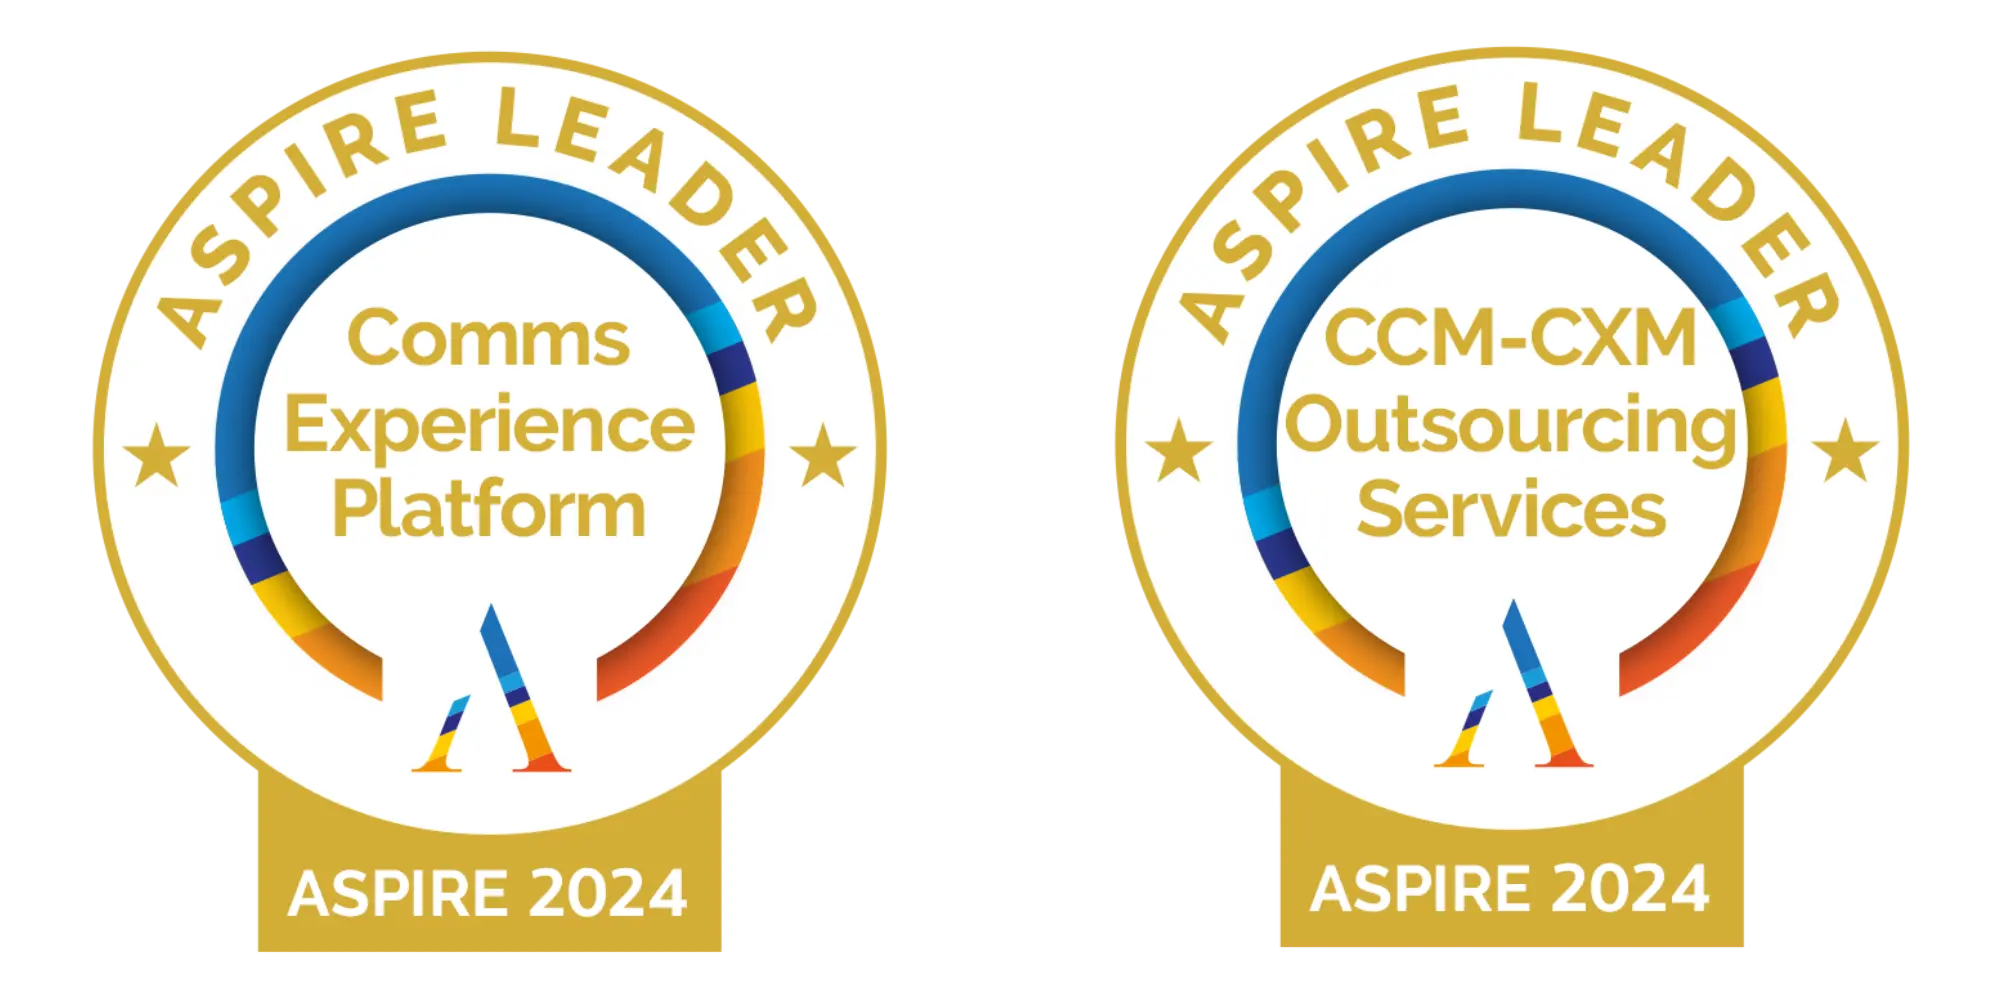 Doxim Maintains Prestigious Leader Position on Aspire’s 2024 CCM-CXM Leaderboard for a Fourth Year 